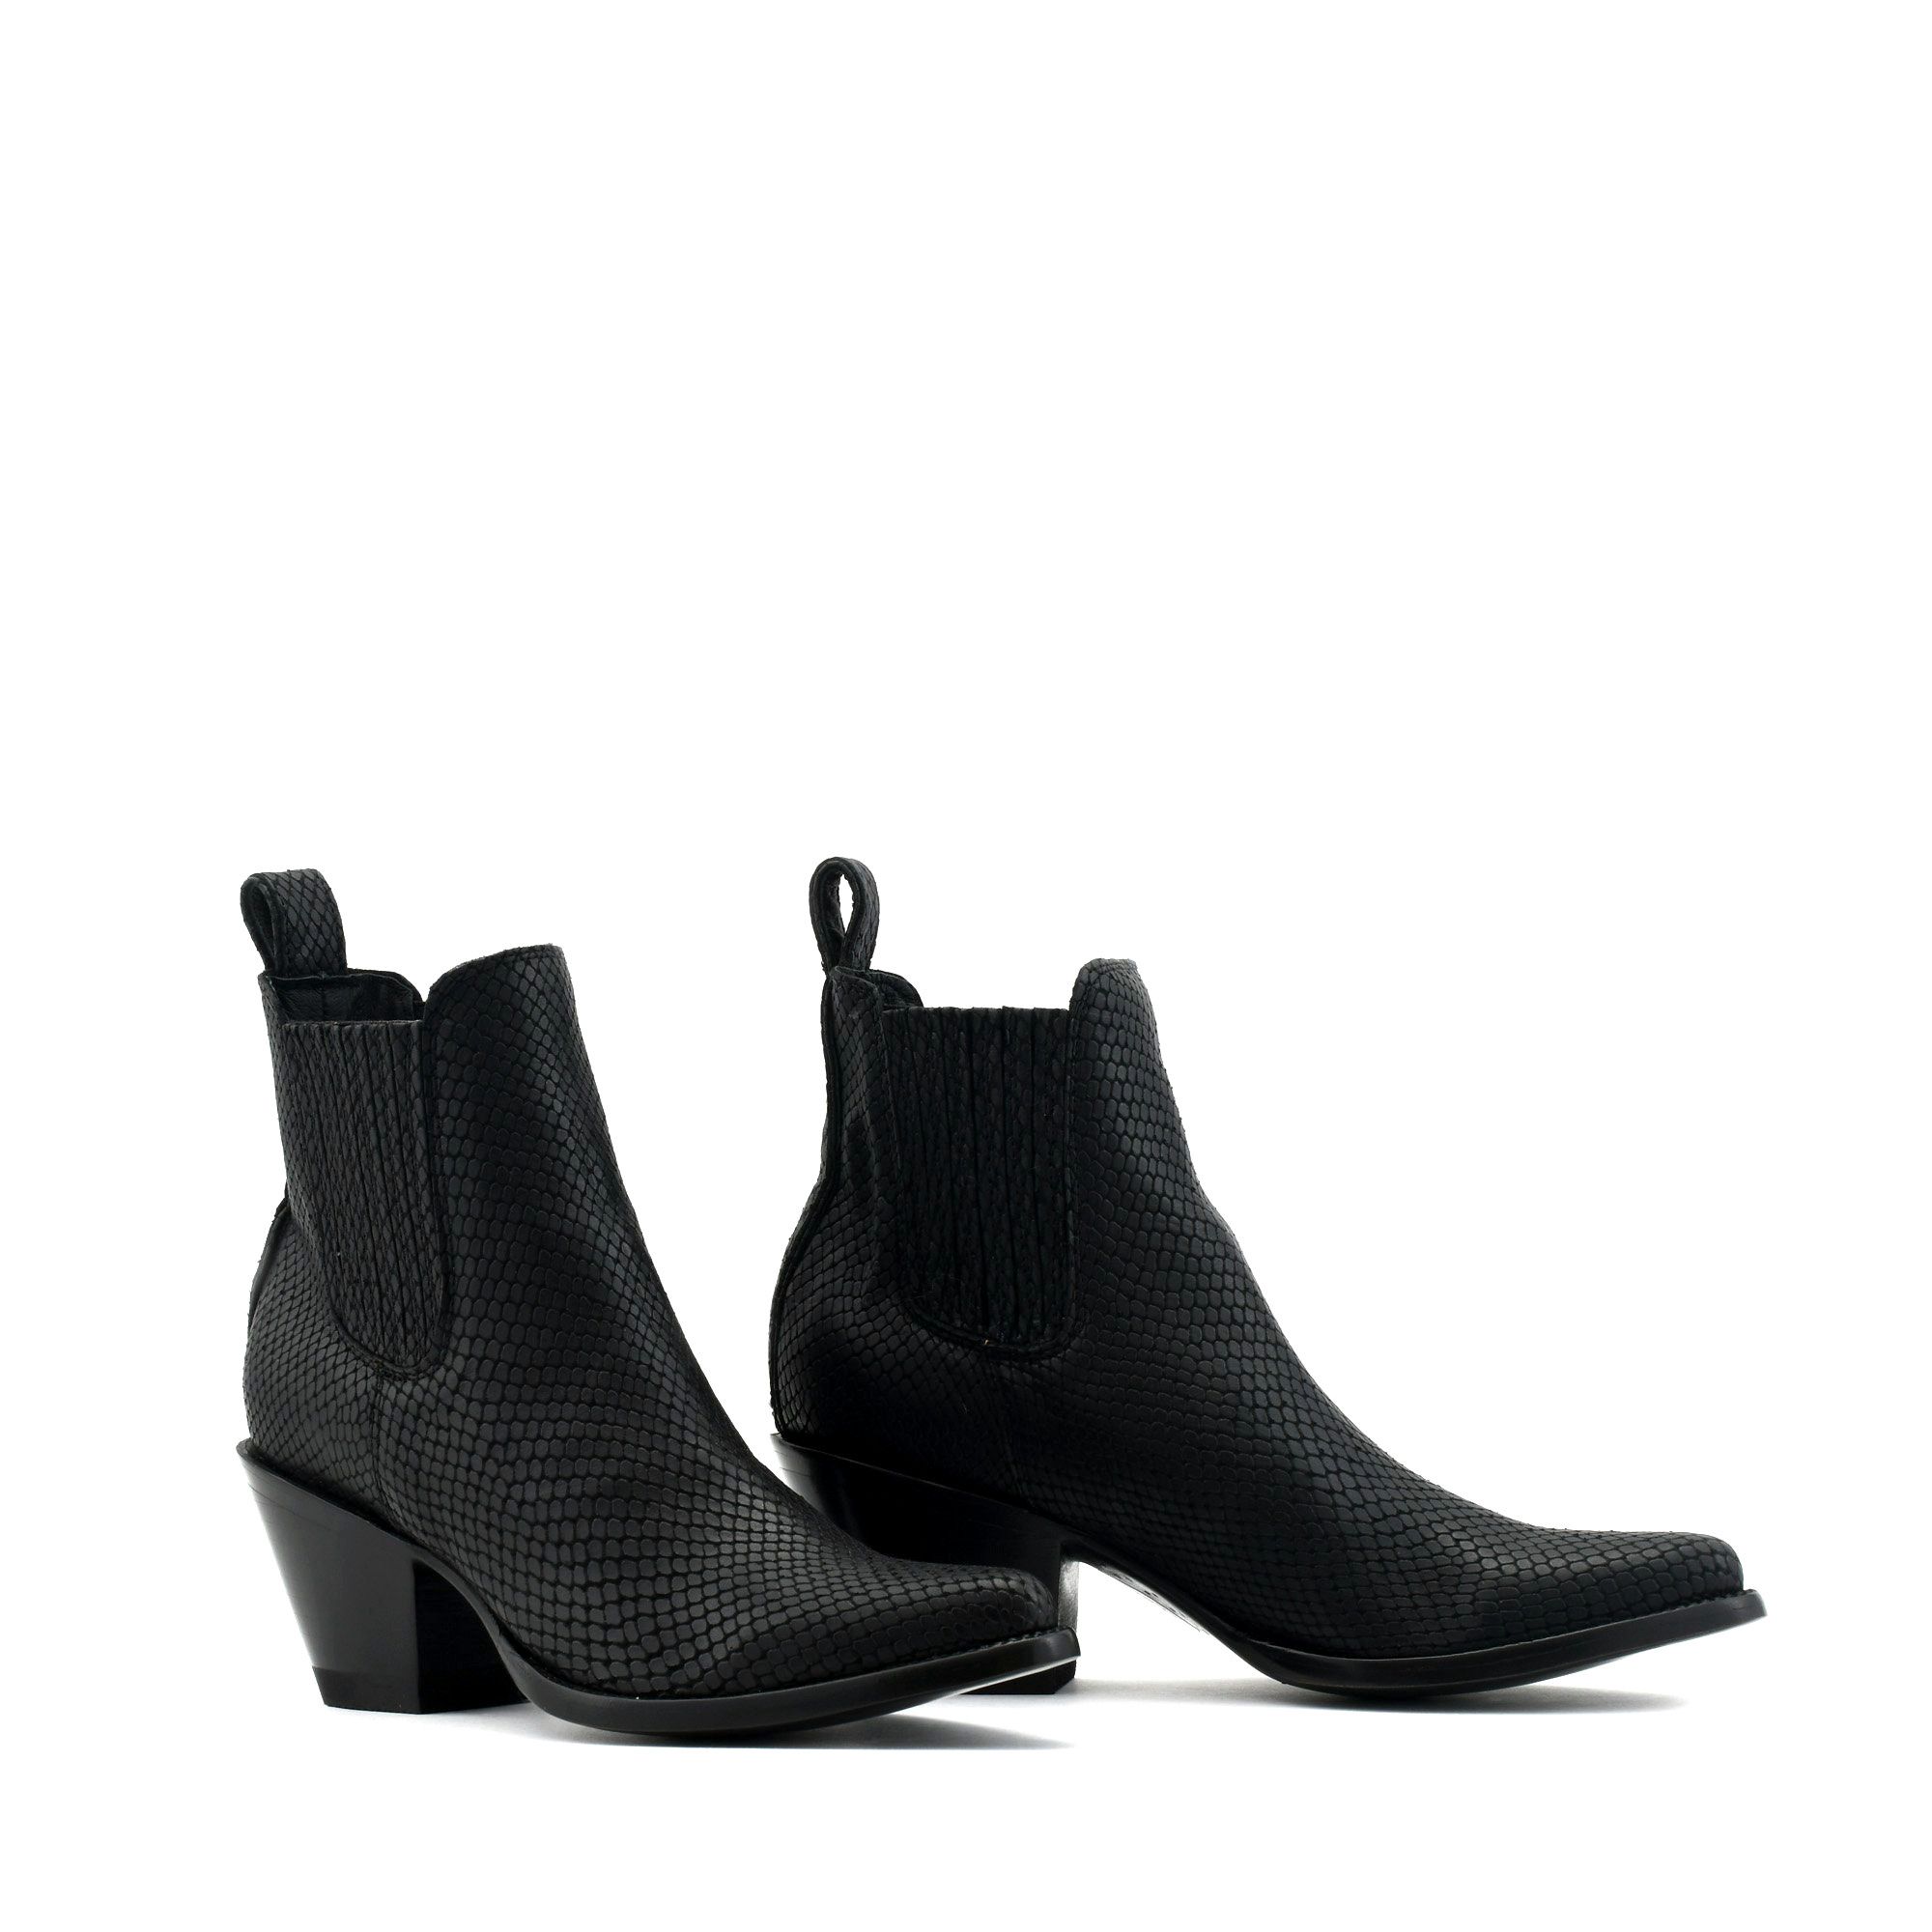 ESTUDIO BLACK SNAKE POINTED TOE ANKLE BOOTS, LEATHER EMBOSSED SNAKE    ELASTICIZED SIDES COVERED   Total heel height 2.6 Inches 